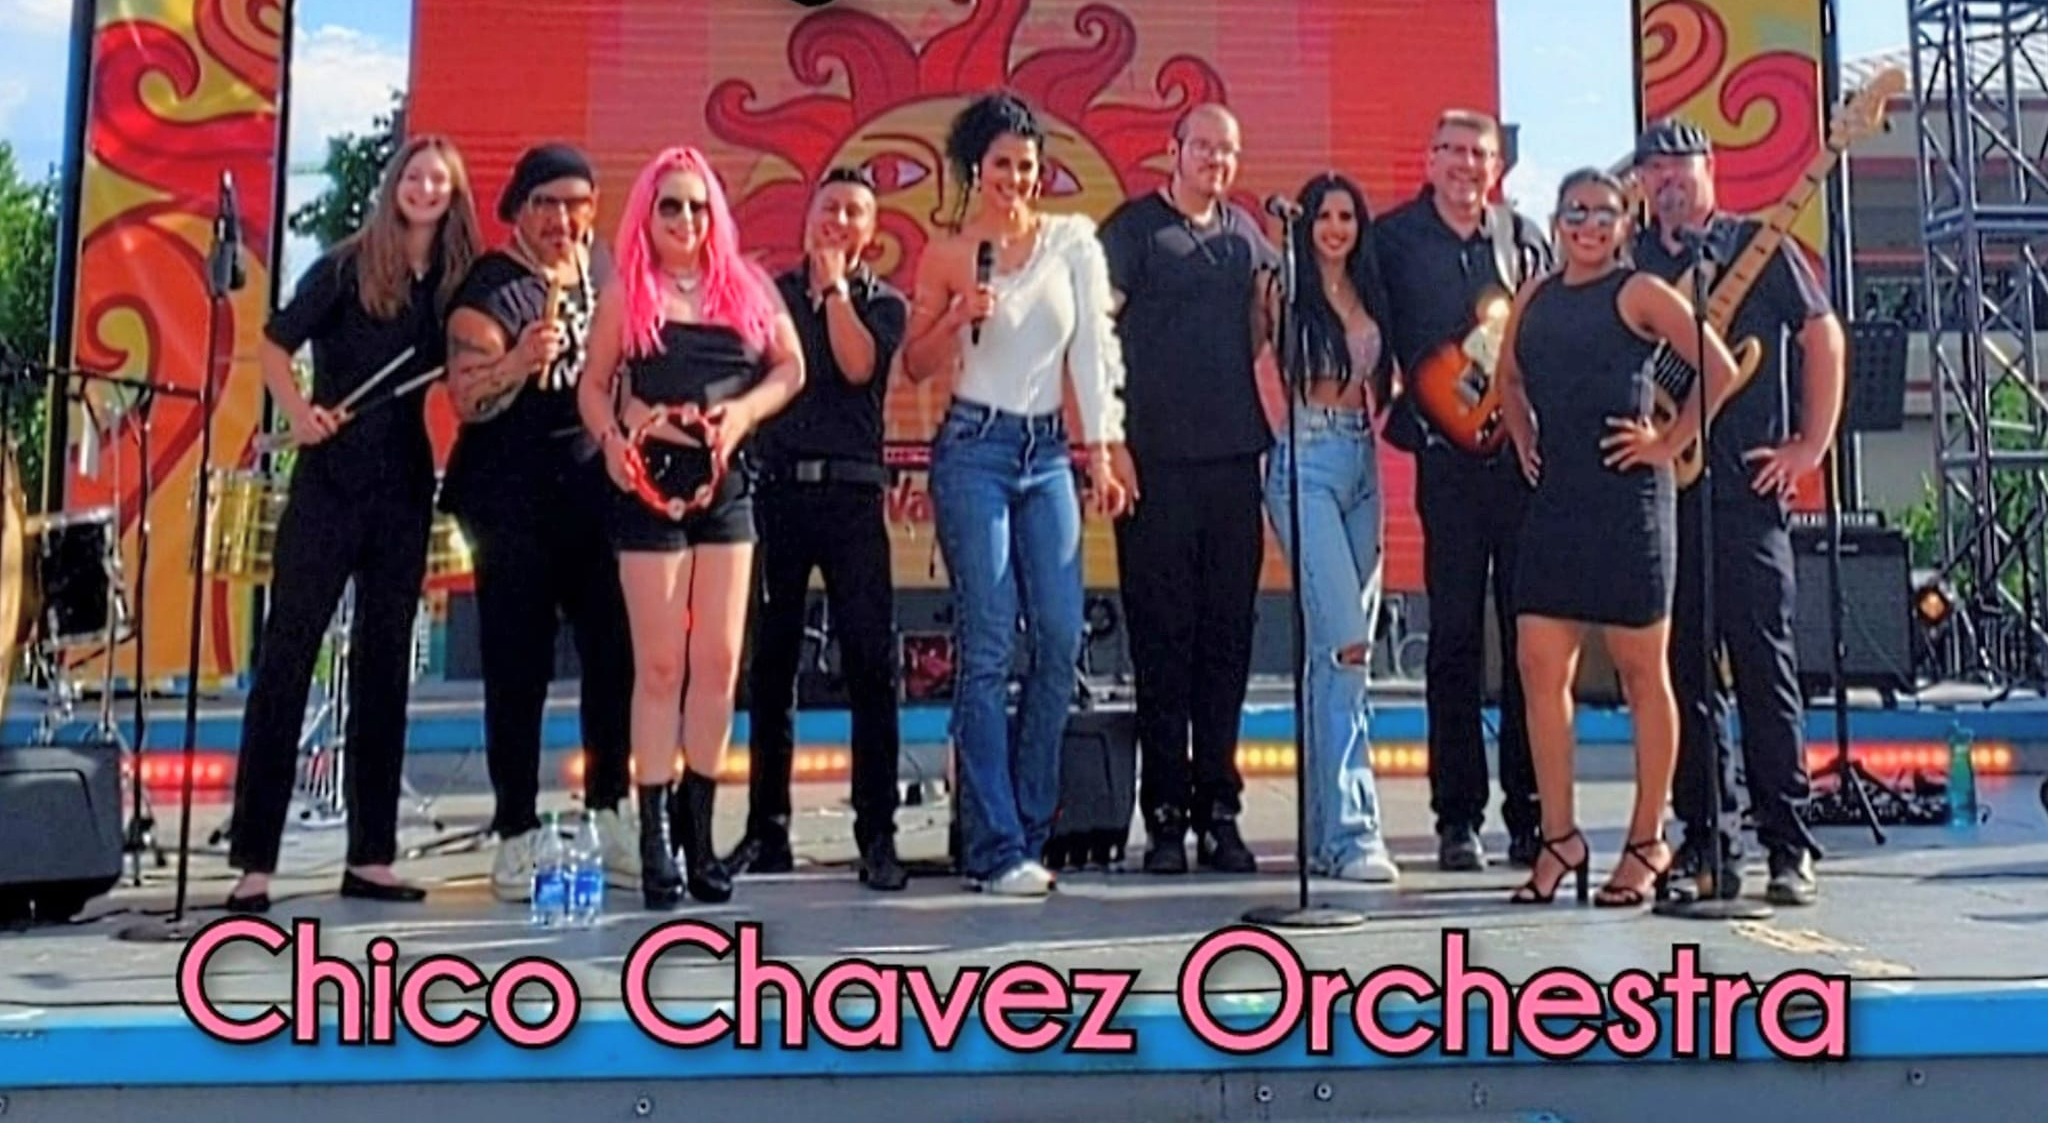 Chico Chavez Orchestra Social